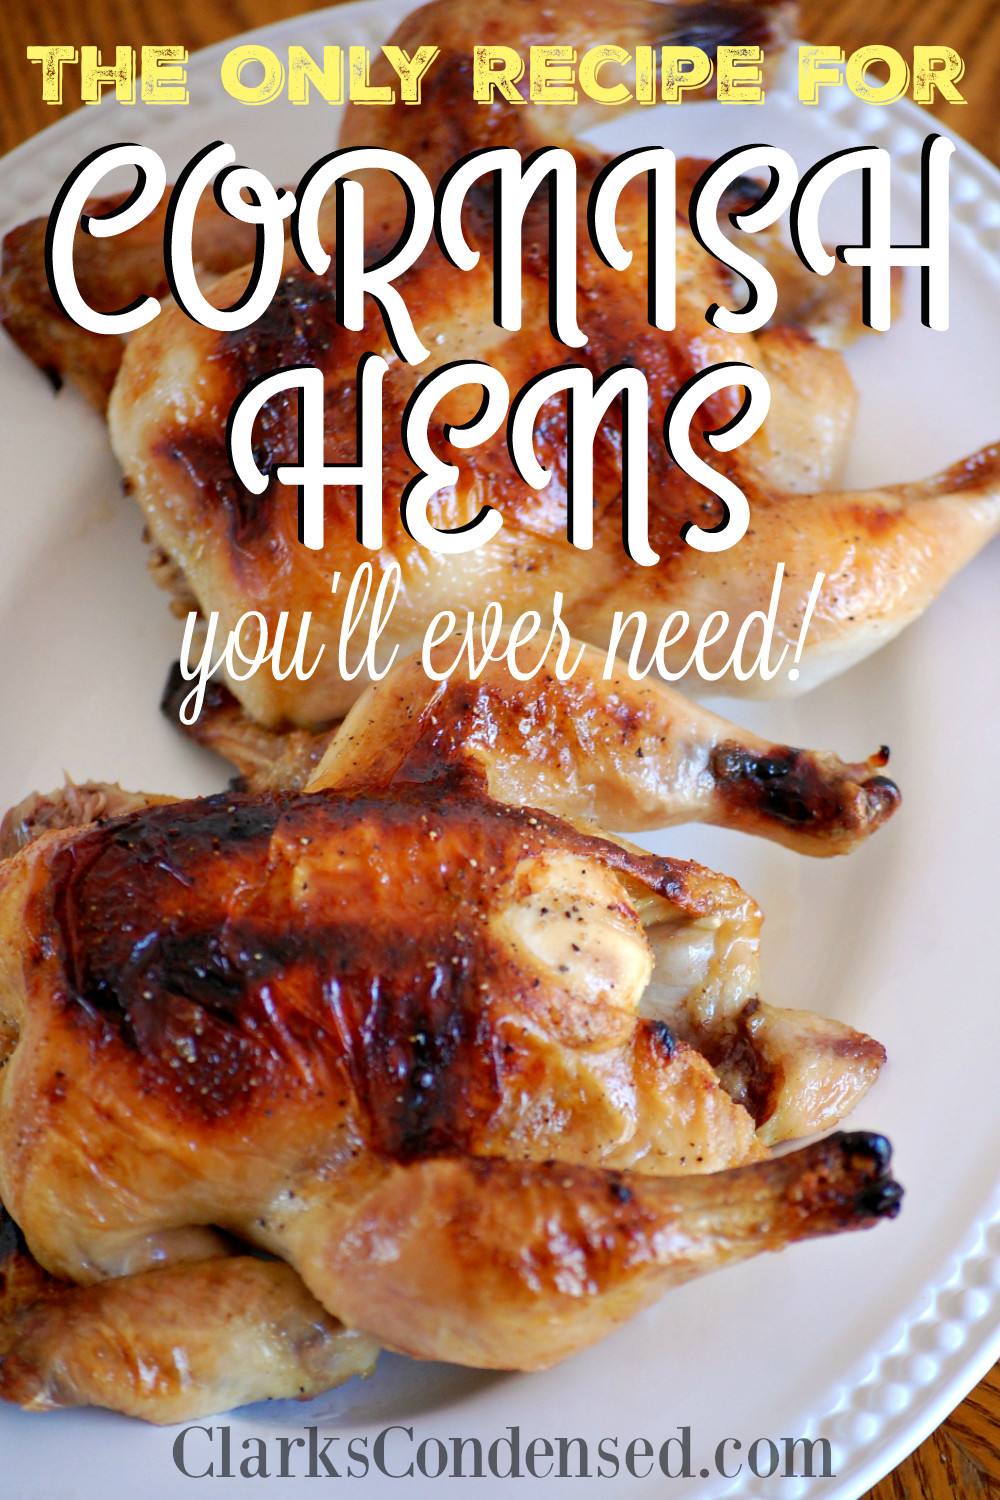 Recipe For Cornish Game Hens
 The ly Recipe for Cornish Hens You Will Ever Need